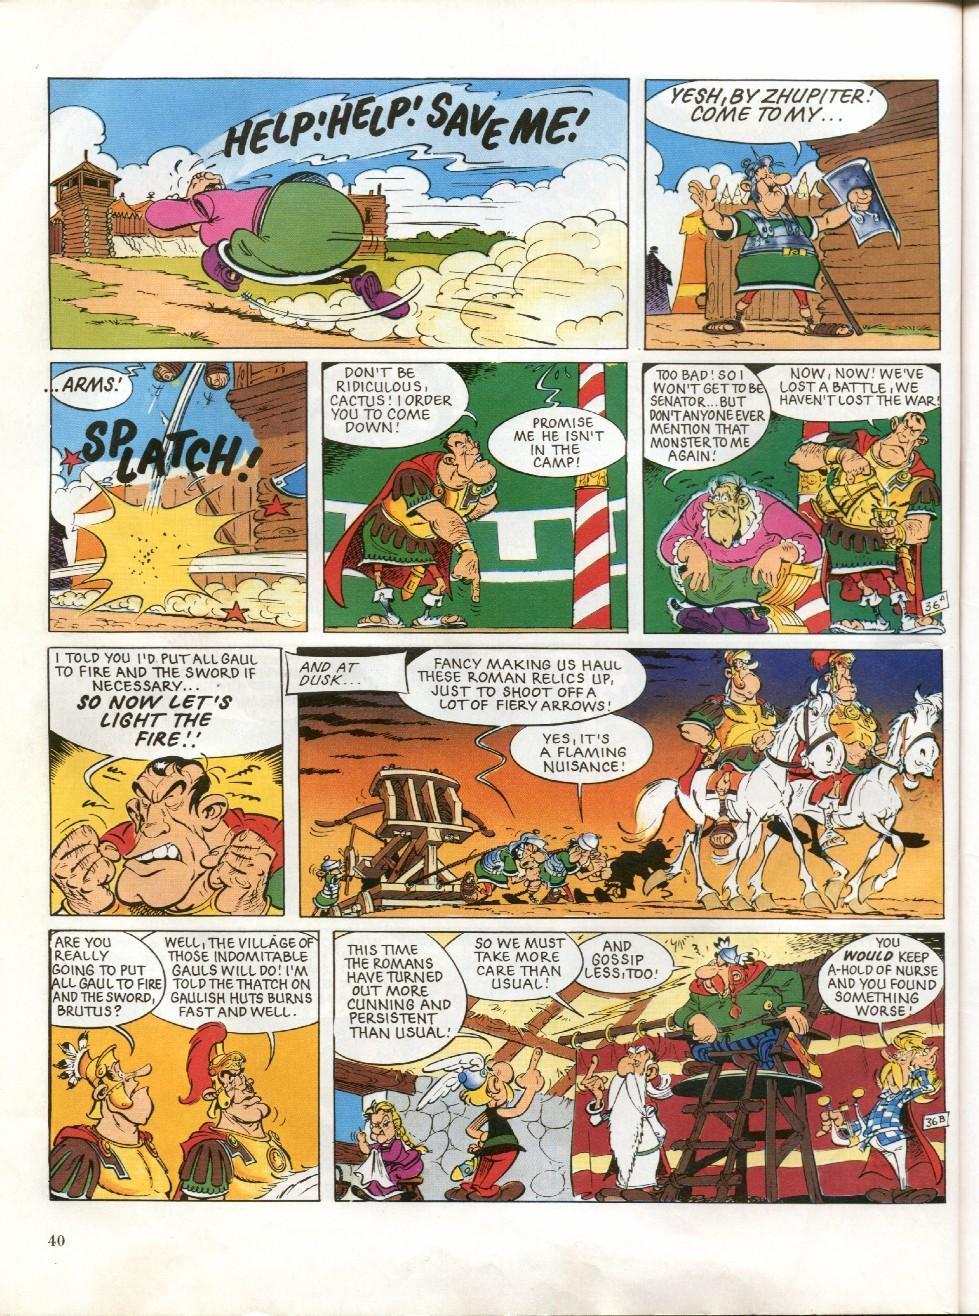 27- Asterix and Son